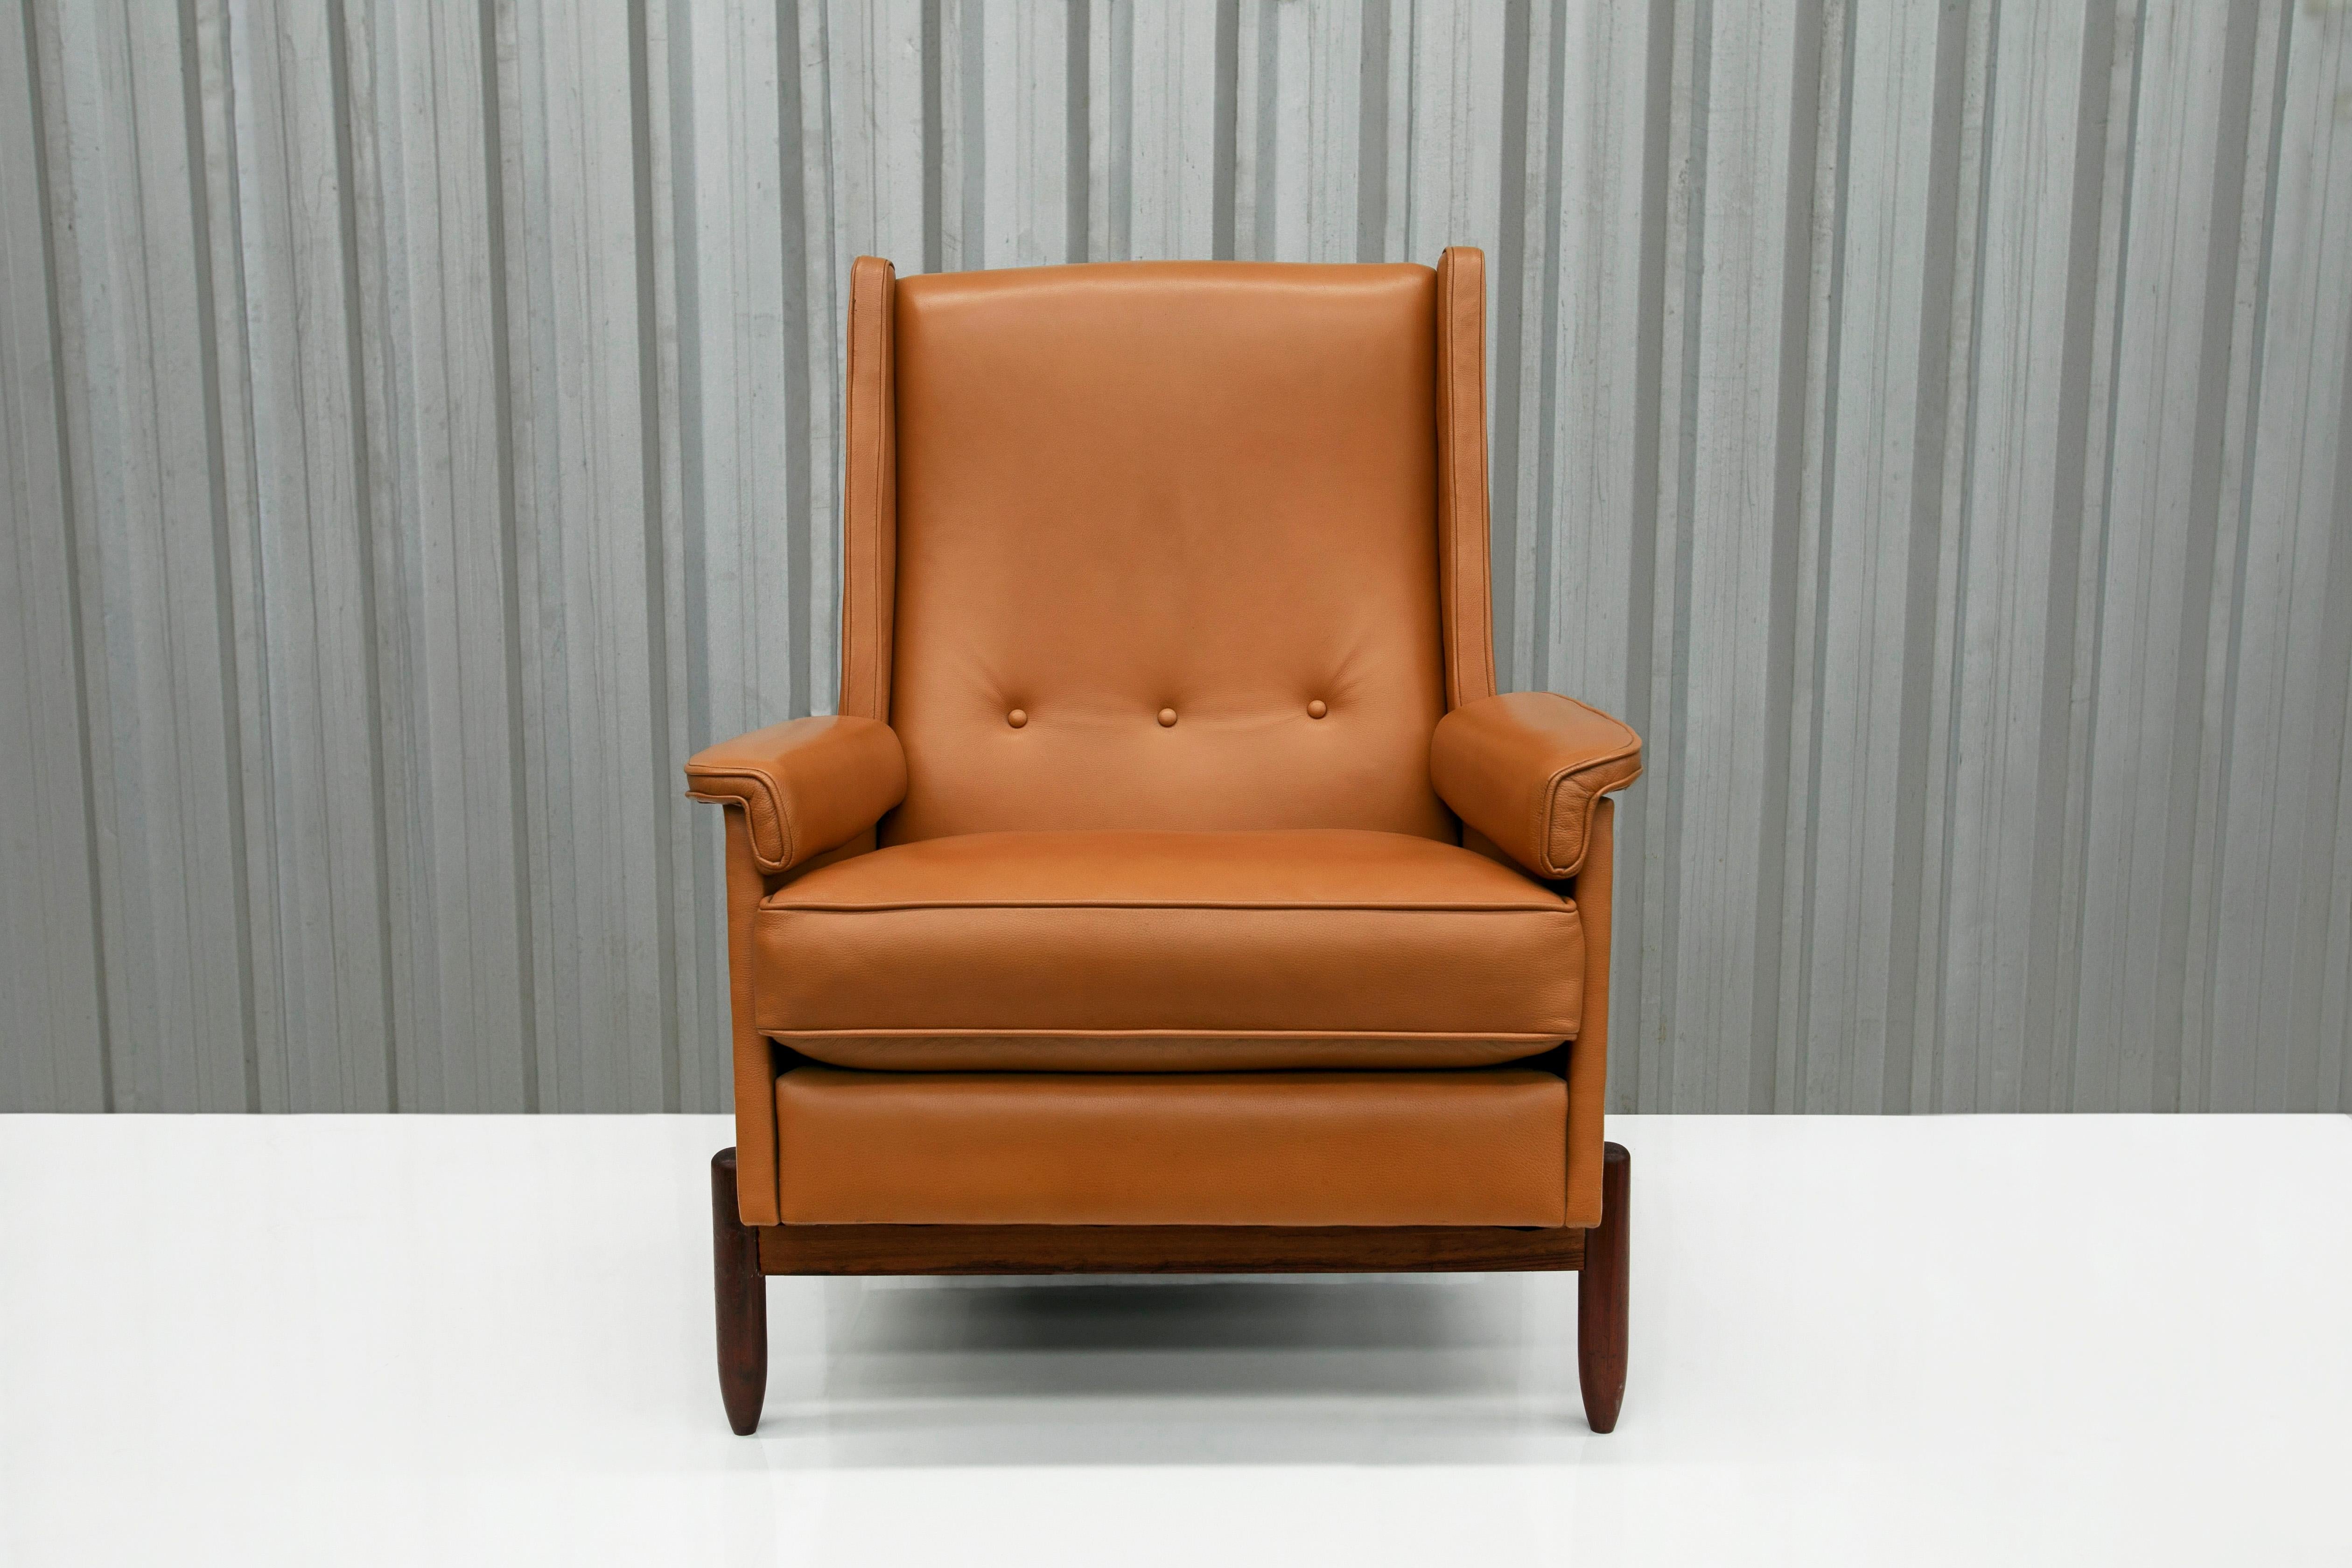 Brazilian Modern Club Chair in Hardwood & Leather by Jorge Jabour, 1960’s For Sale 2